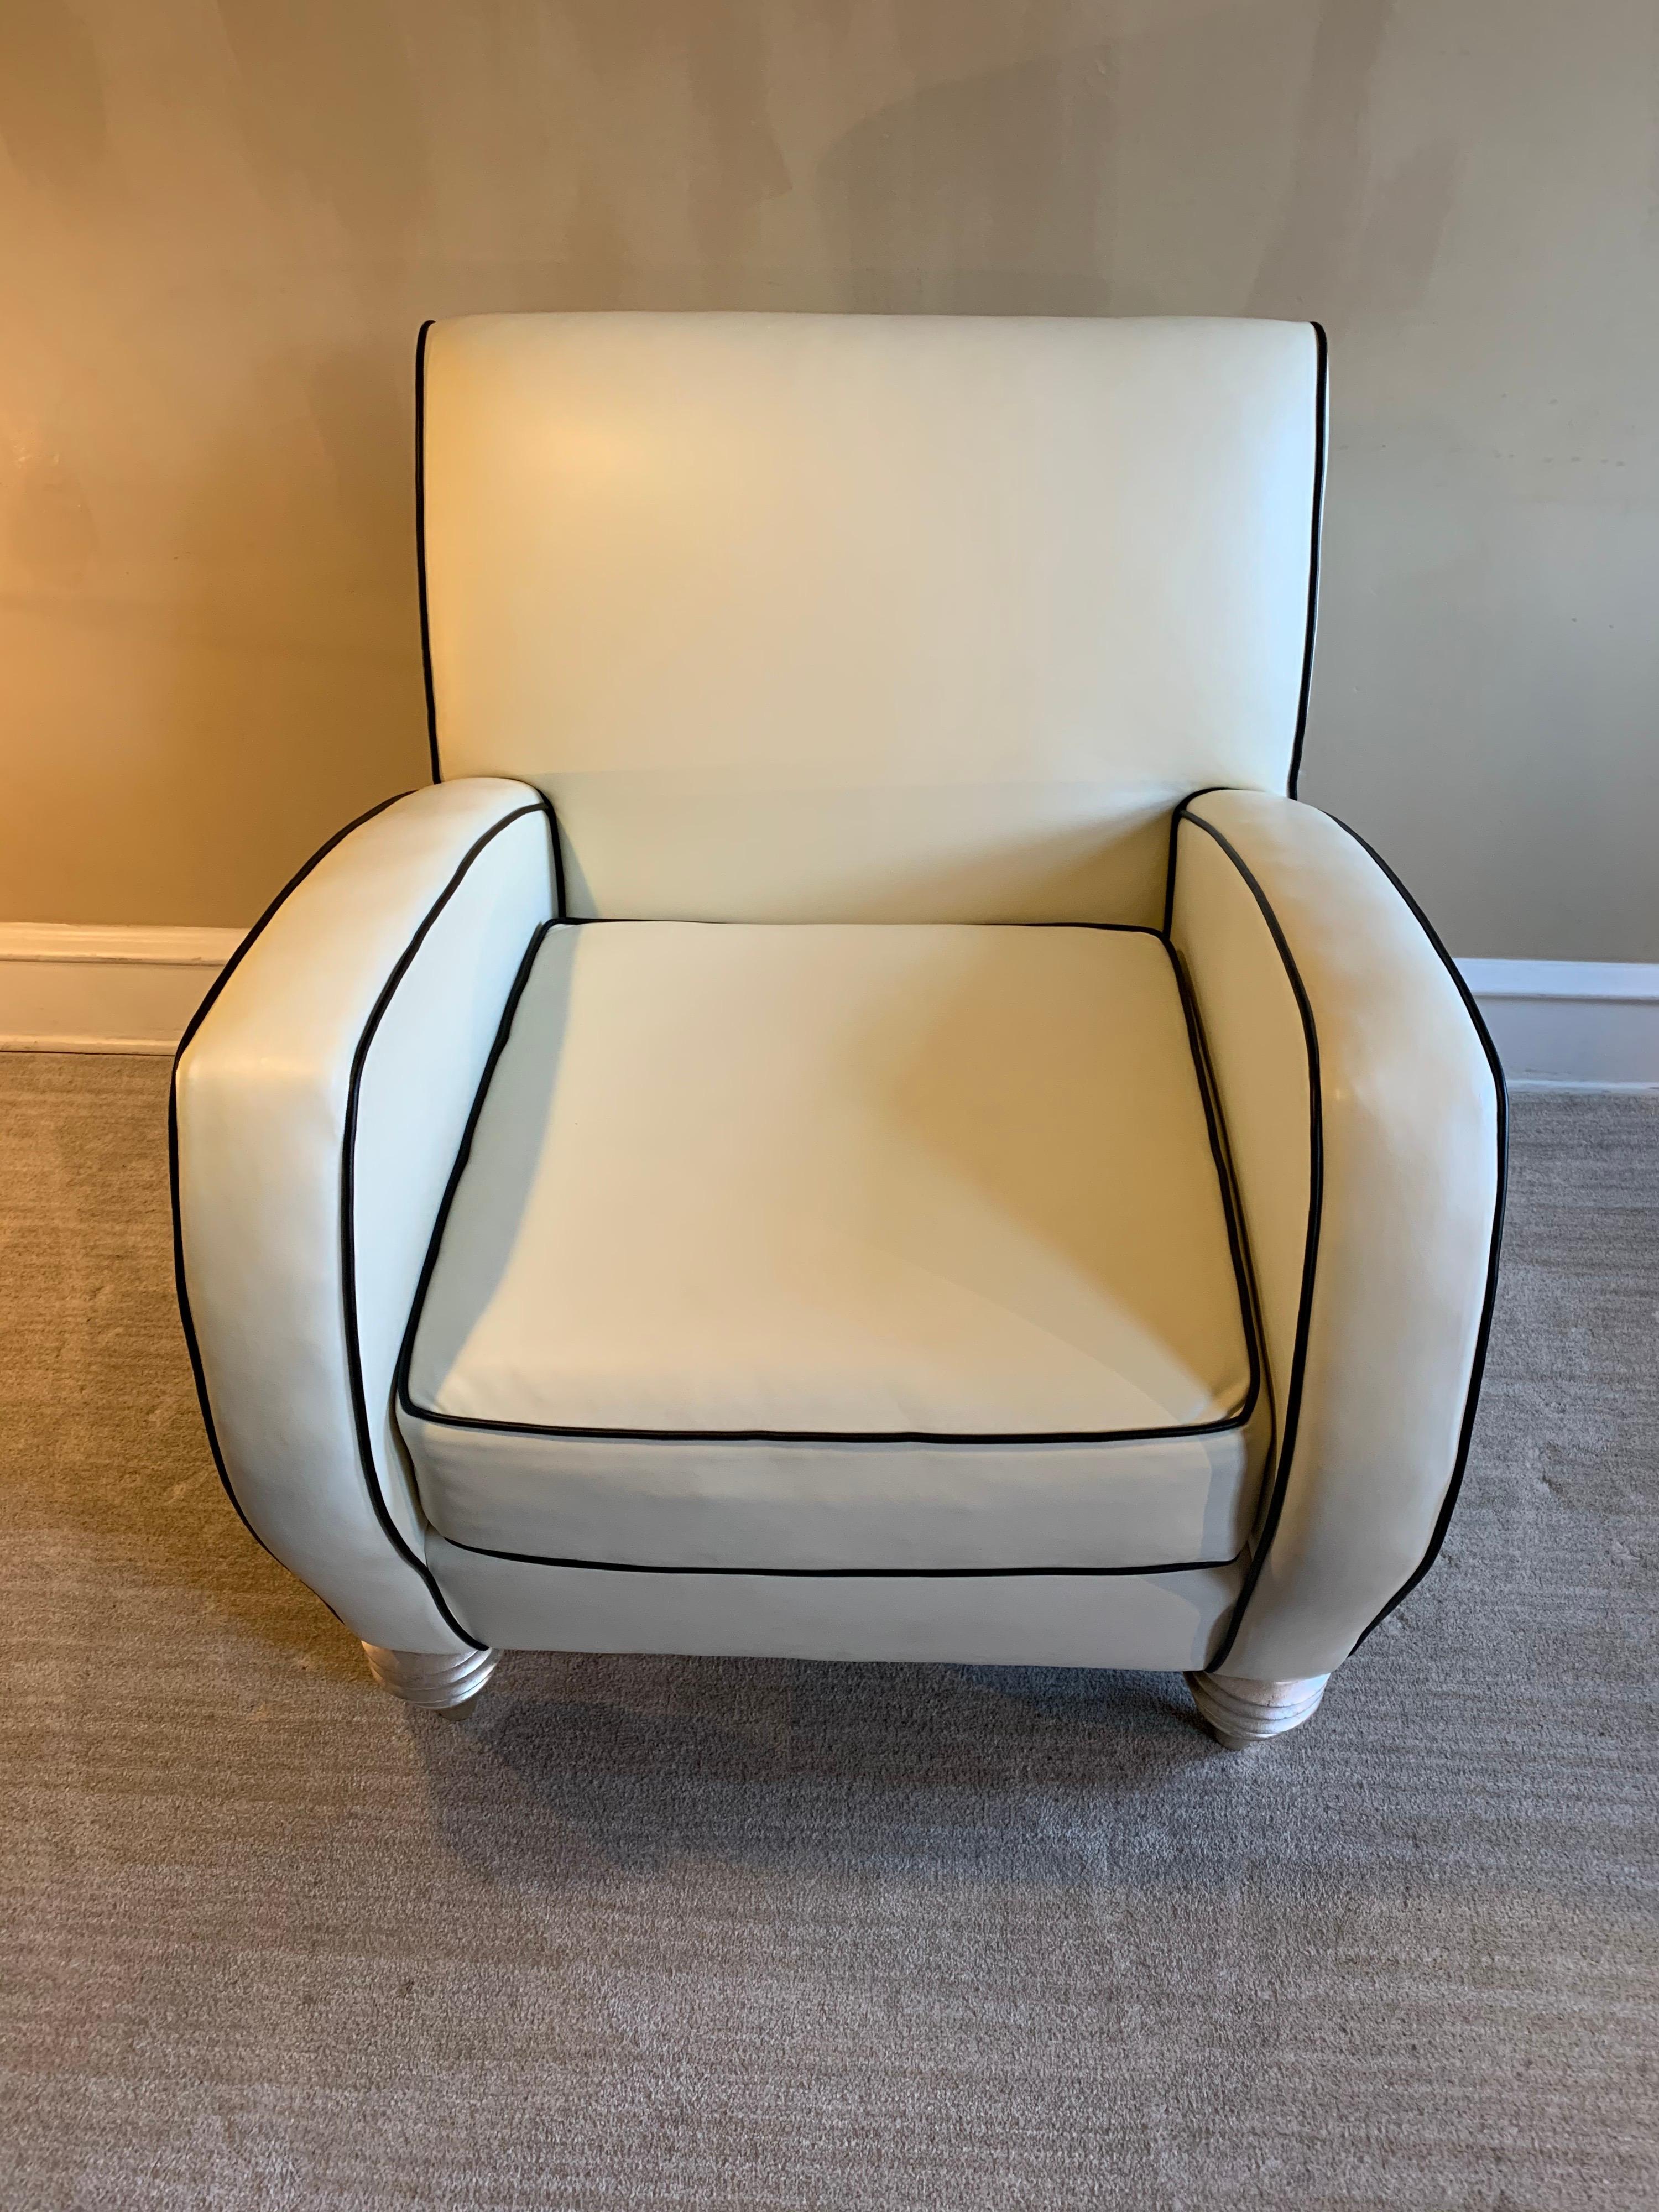 Art Deco Style Cream Leather Club Chair by Larry Laslo for Directional (20. Jahrhundert)